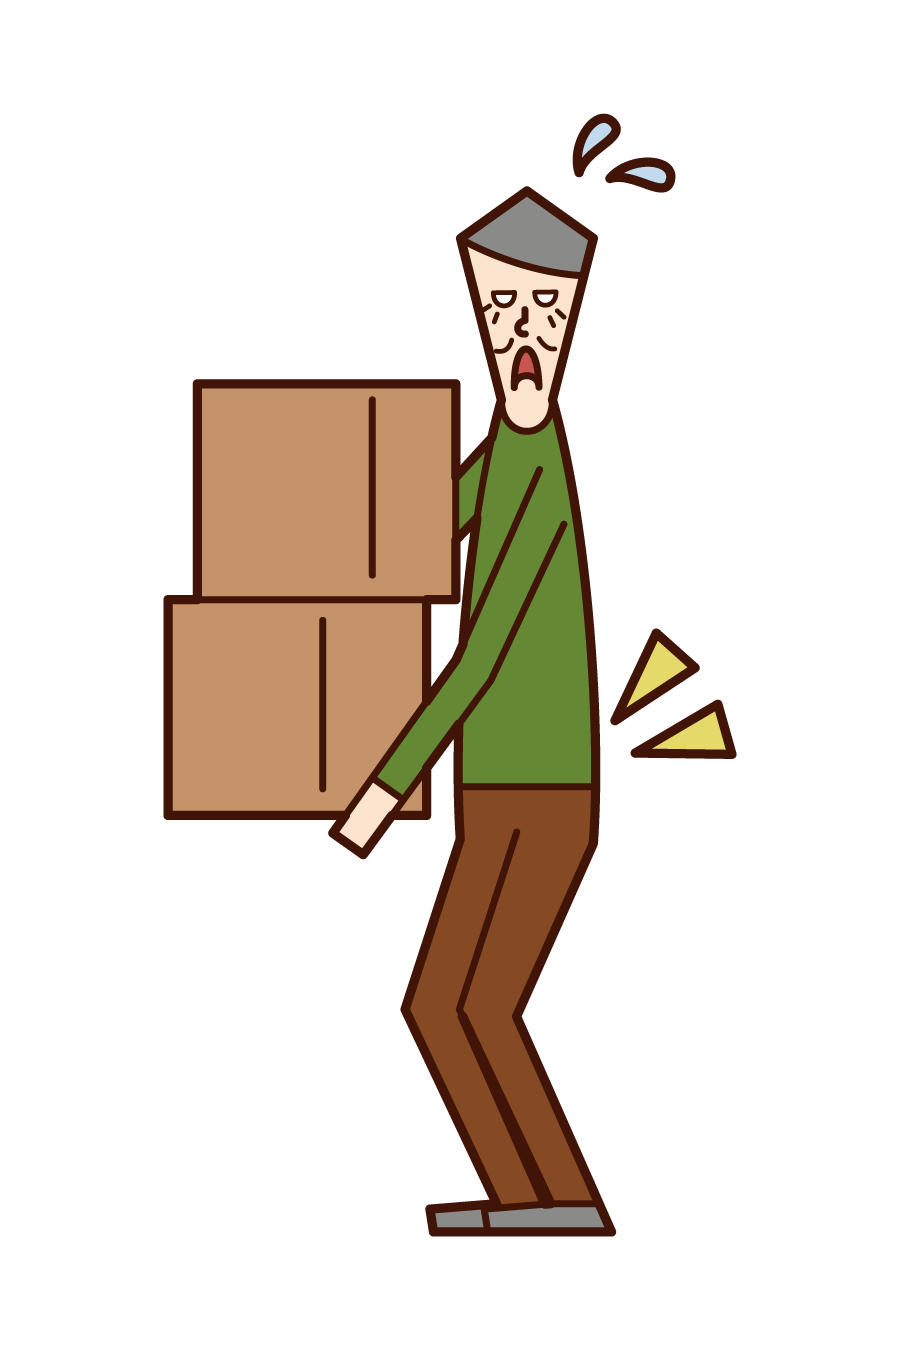 Illustration of a man carrying heavy baggage